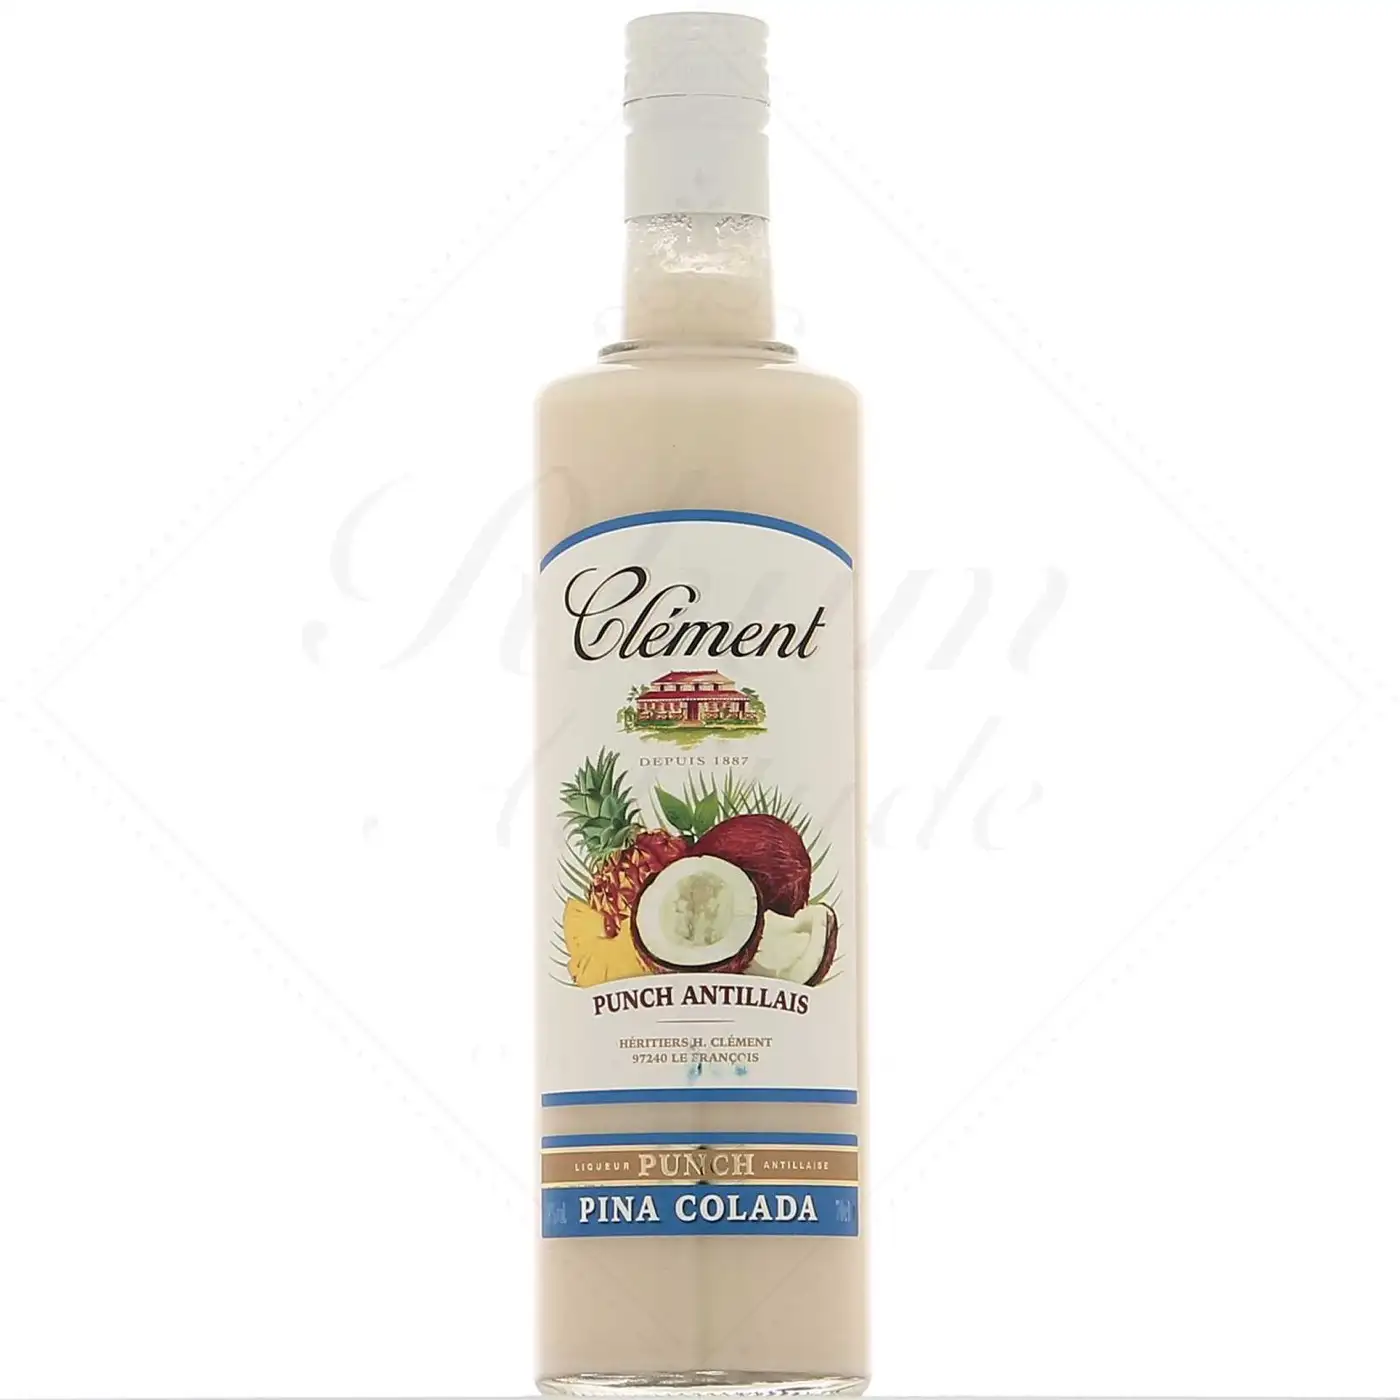 Image of the front of the bottle of the rum Punch Pina Colada